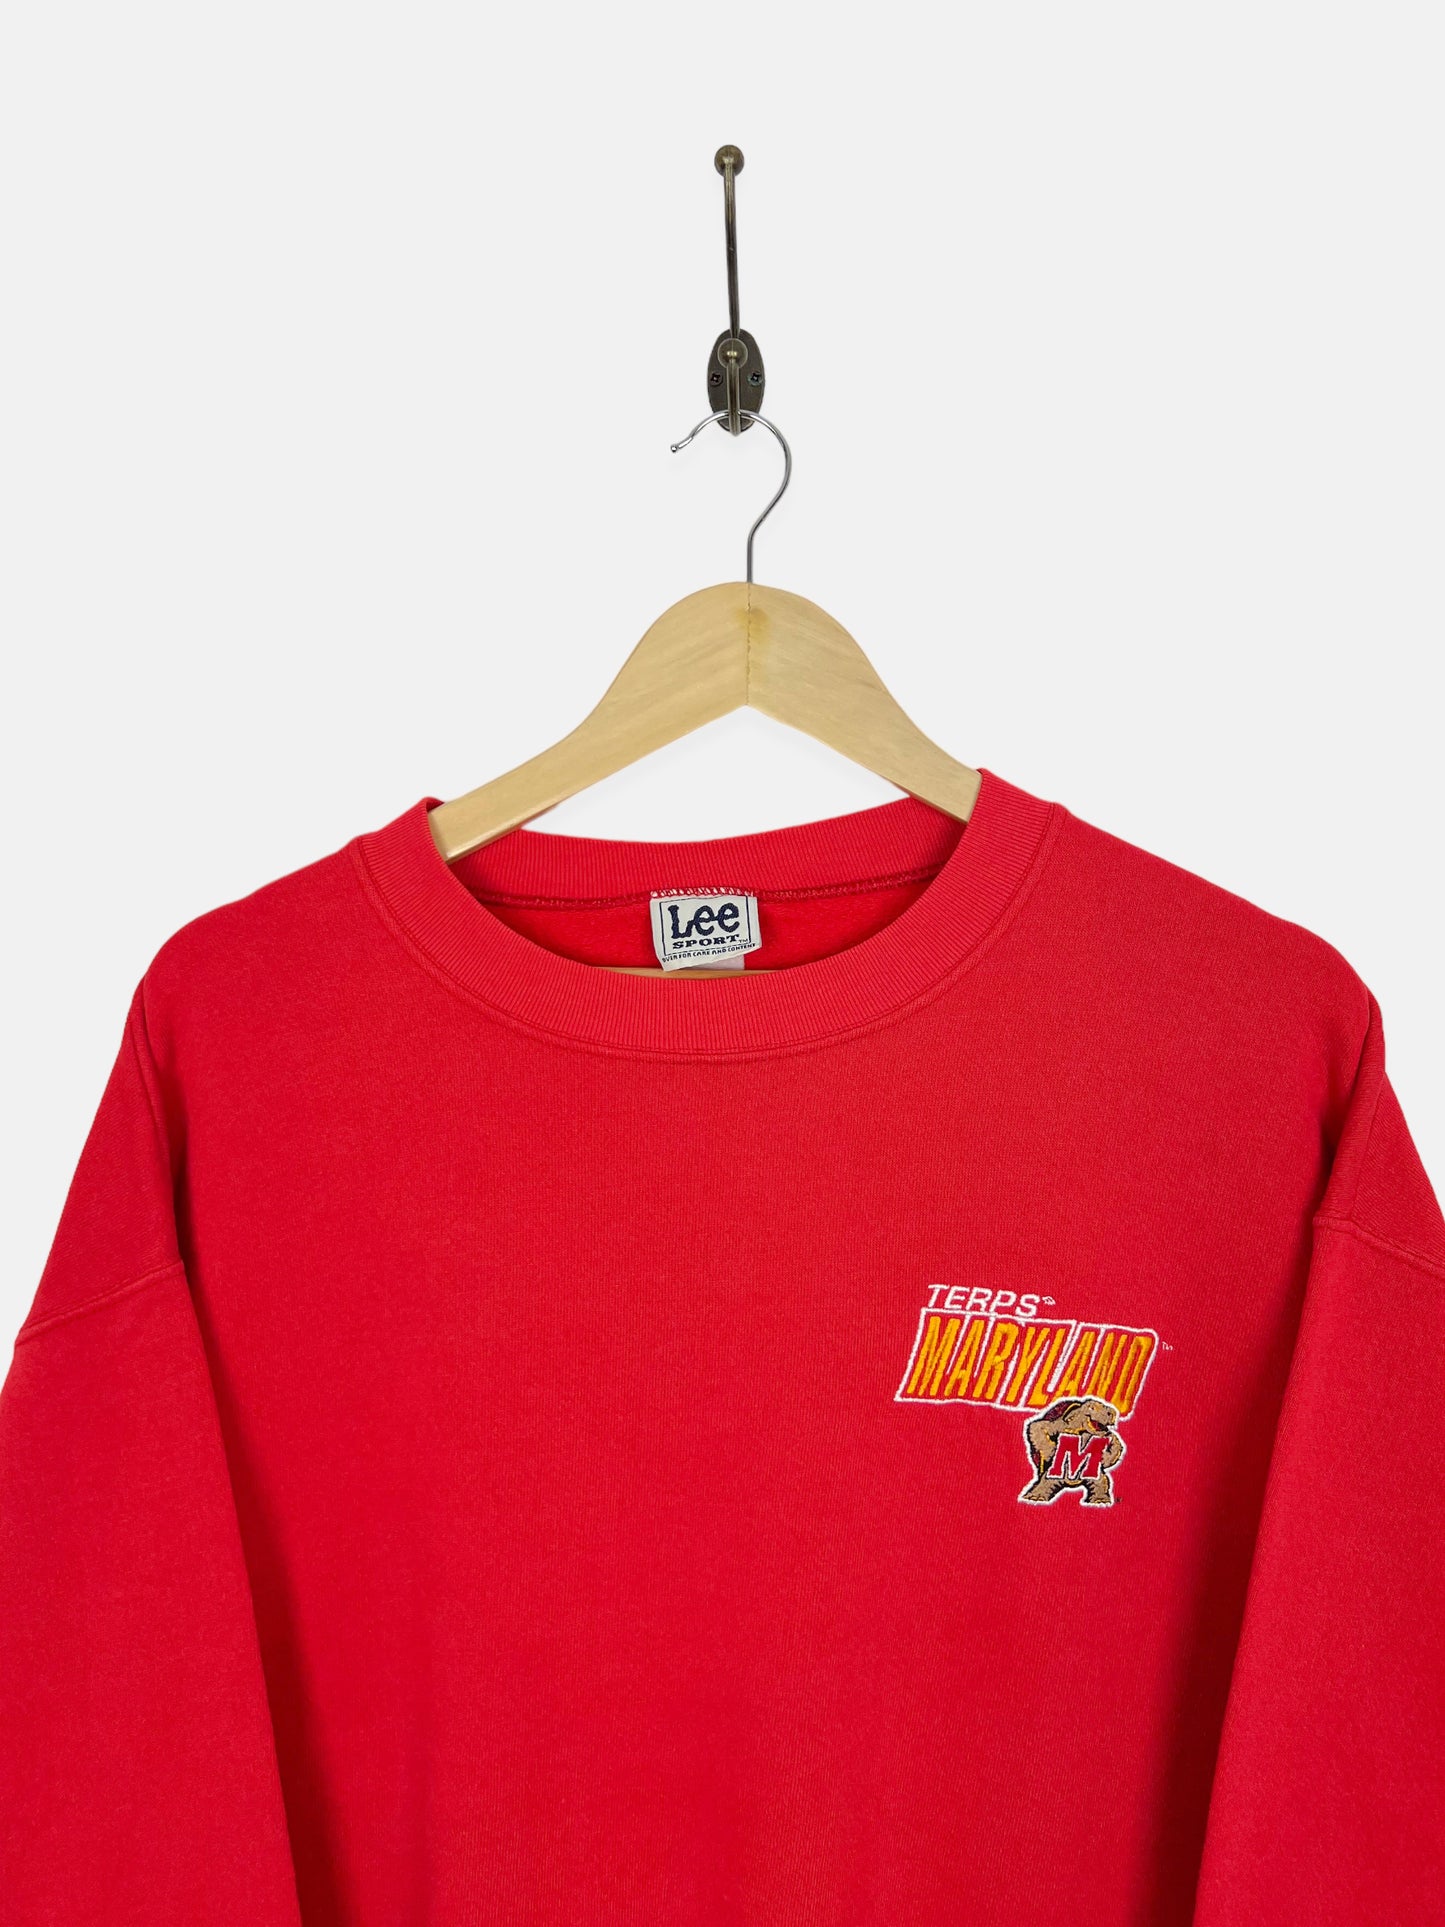 90's Maryland Terps Embroidered Vintage Sweatshirt Size M